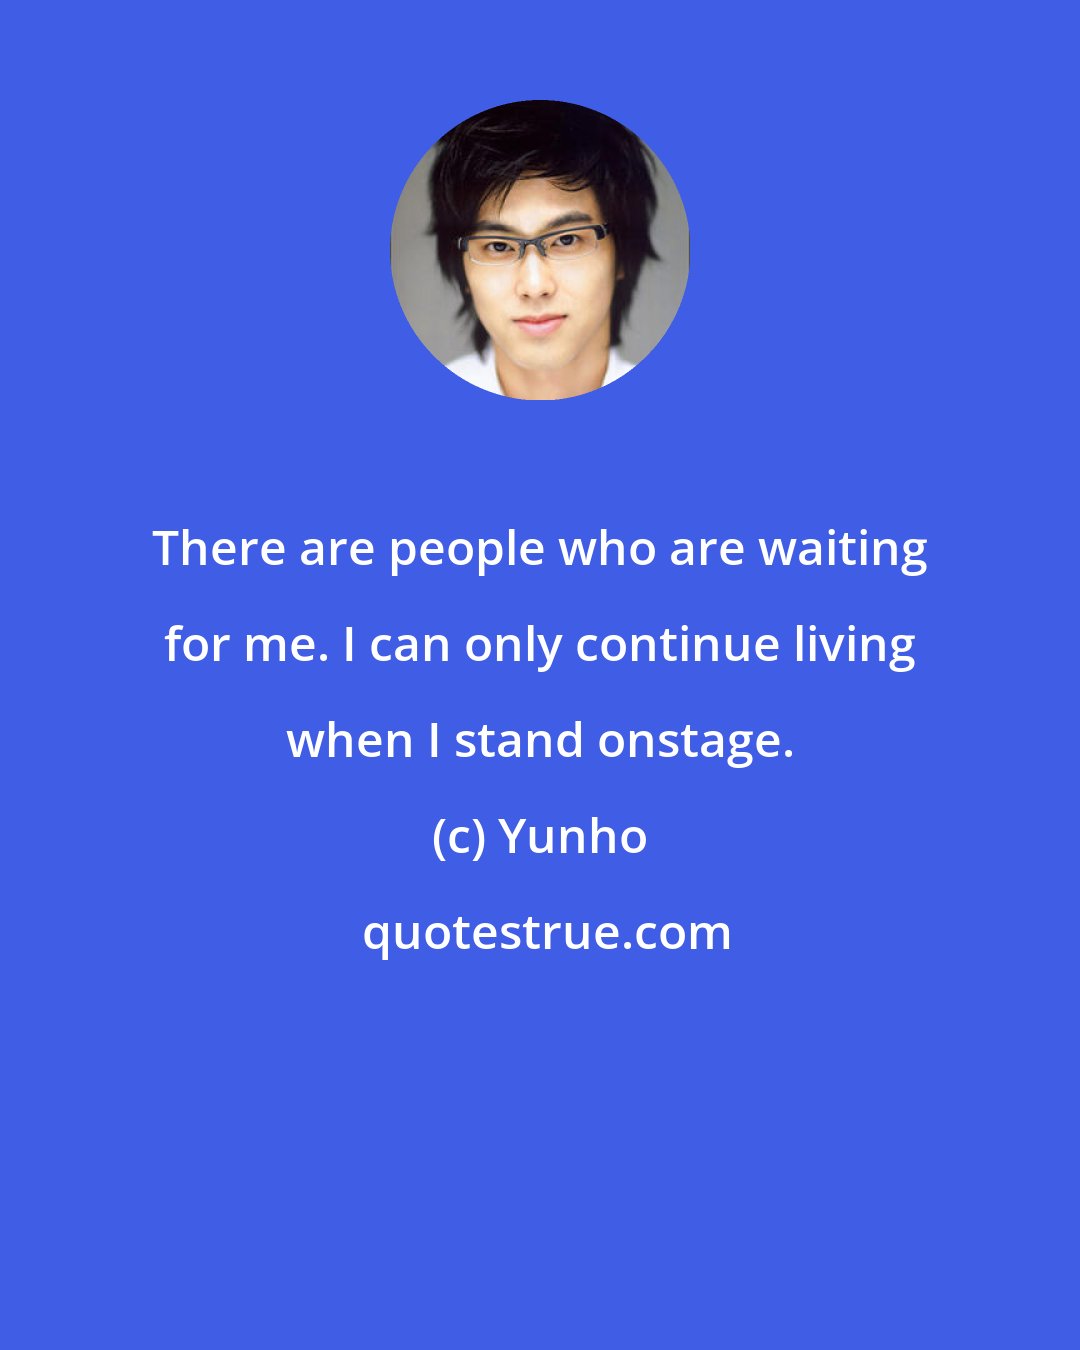 Yunho: There are people who are waiting for me. I can only continue living when I stand onstage.